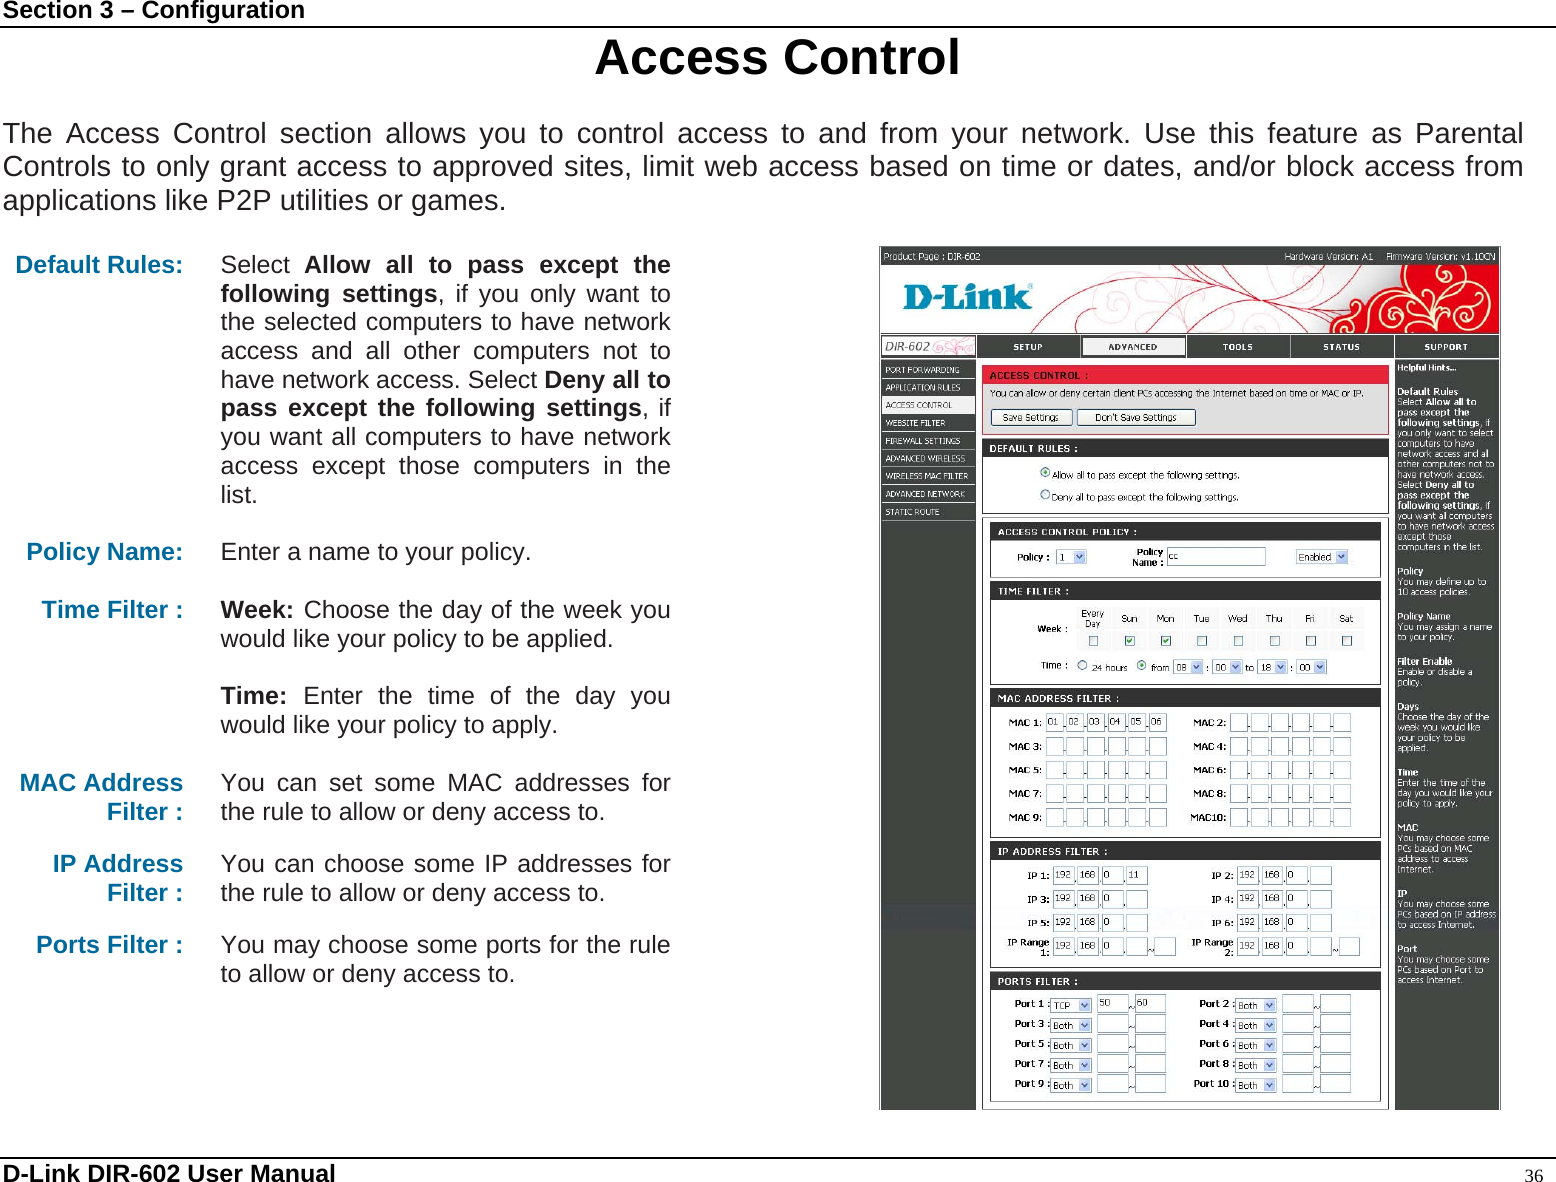 Section 3 – Configuration  Access Control  The Access Control section allows you to control access to and from your network. Use this feature as Parental Controls to only grant access to approved sites, limit web access based on time or dates, and/or block access from applications like P2P utilities or games.   Default Rules: Select  Allow all to pass except the following settings, if you only want to the selected computers to have network access and all other computers not to have network access. Select Deny all to pass except the following settings, if you want all computers to have network access except those computers in the list.  Policy Name:  Enter a name to your policy.  Time Filter :  Week: Choose the day of the week you would like your policy to be applied.  Time:  Enter the time of the day you would like your policy to apply.  MAC Address Filter :  You can set some MAC addresses for the rule to allow or deny access to.  IP Address Filter :  You can choose some IP addresses for the rule to allow or deny access to.  Ports Filter :  You may choose some ports for the rule to allow or deny access to.   D-Link DIR-602 User Manual                                                                                               36 